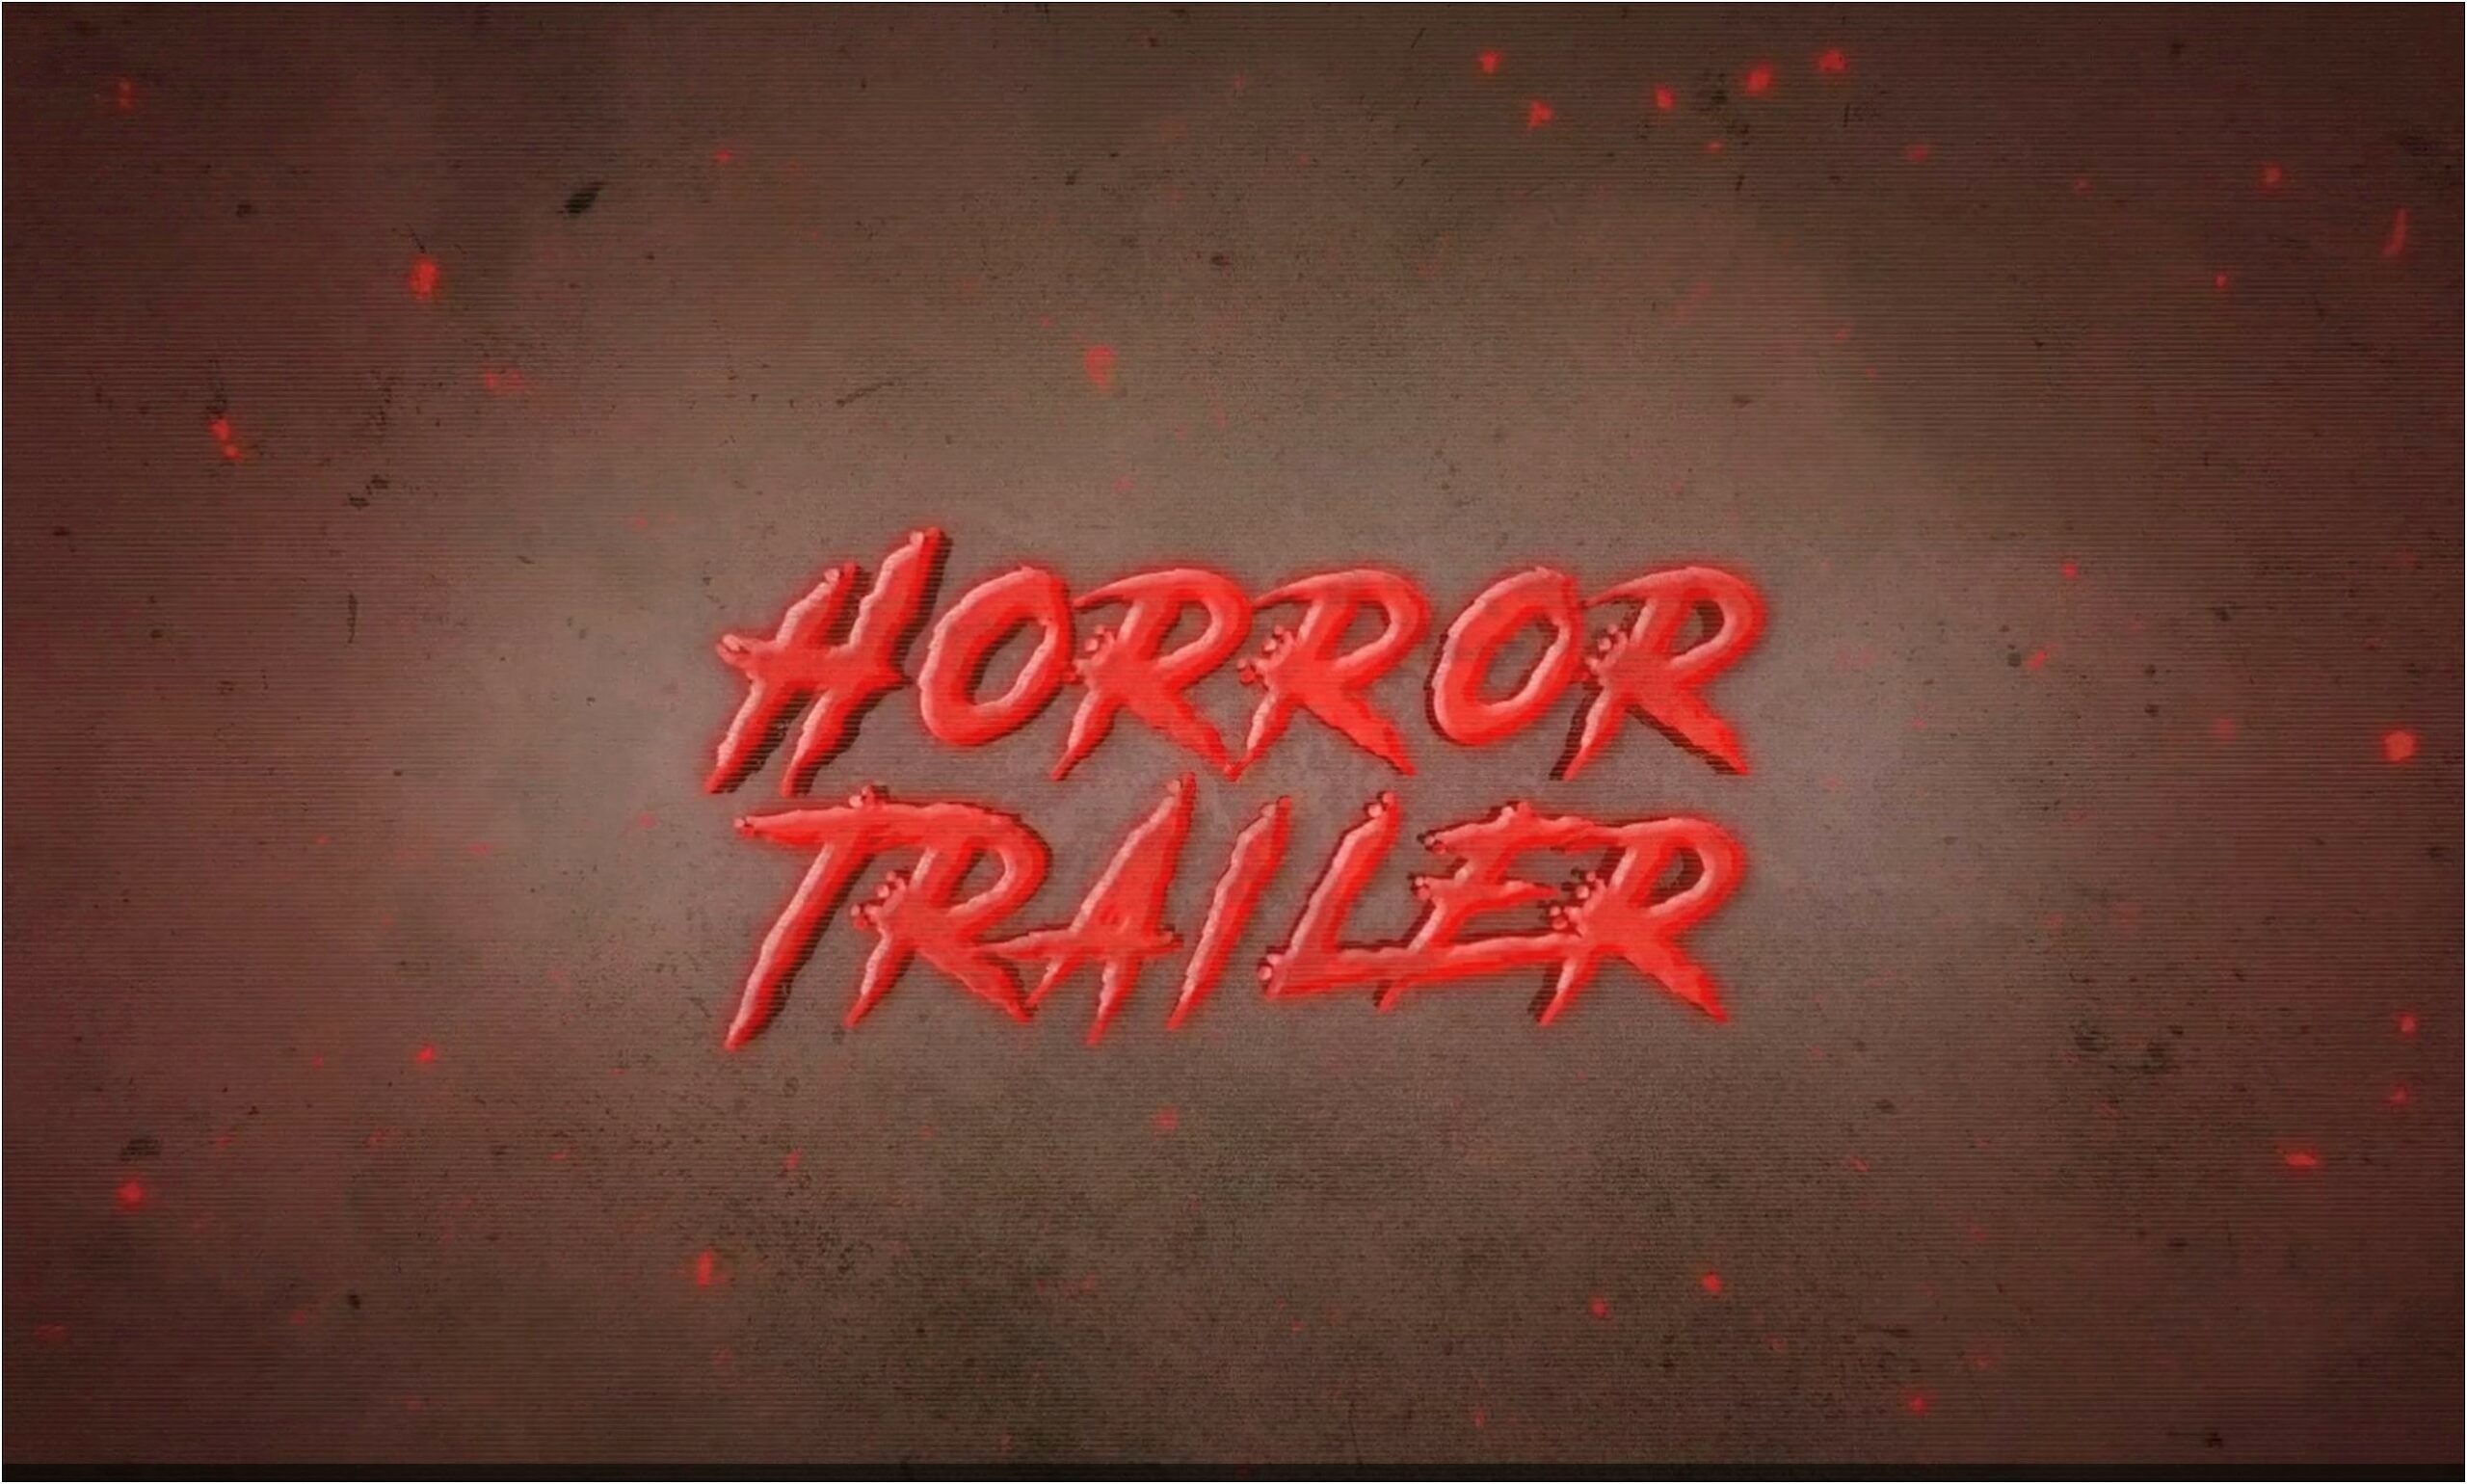 Aggressive Trailer Titles After Effects Template Free Download